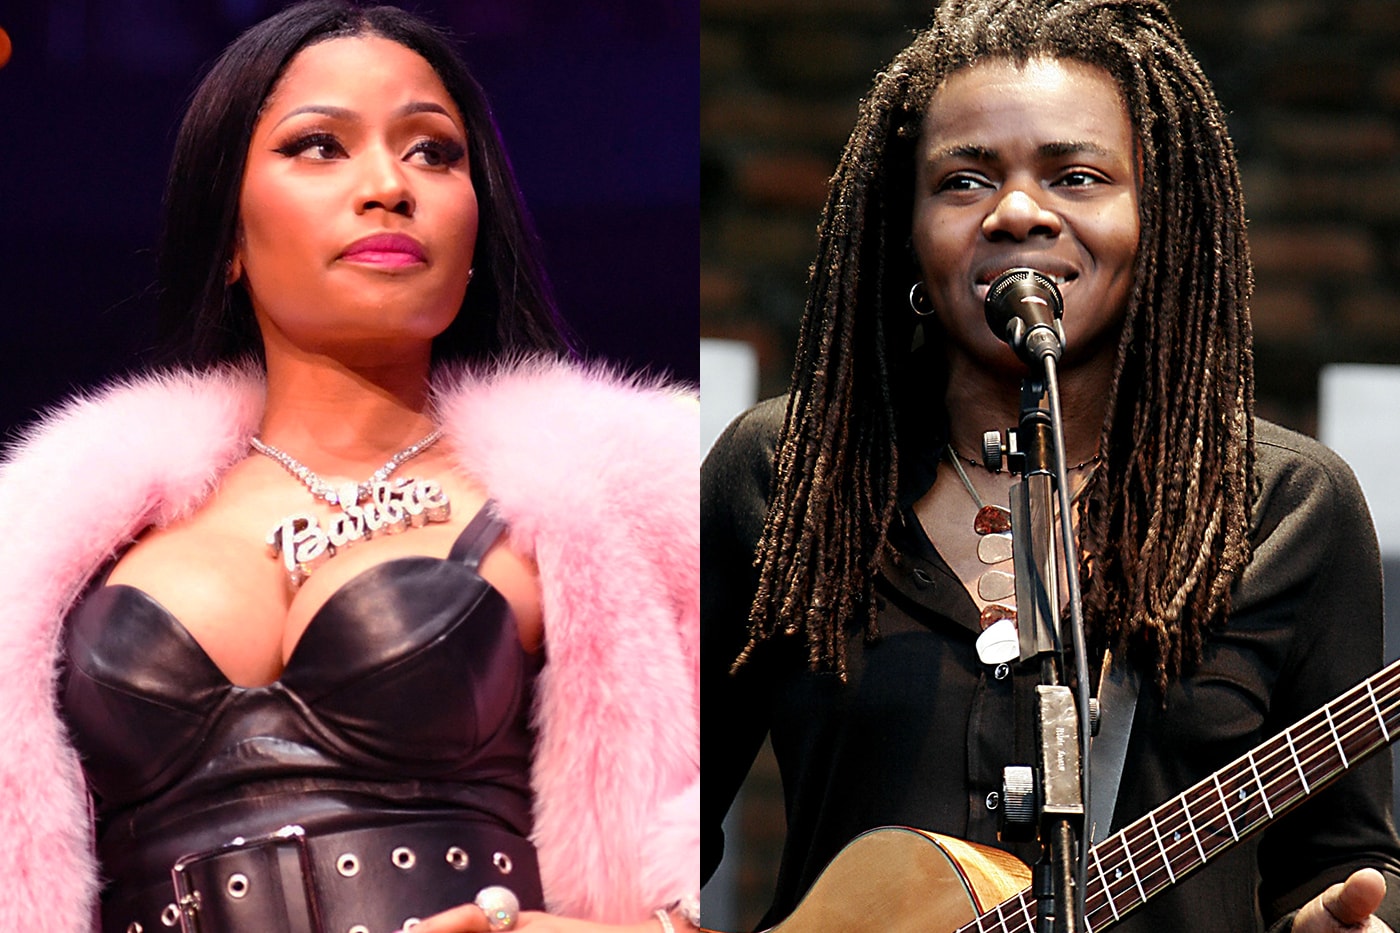 Nicki Minaj Settles Tracy Chapman Sorry baby can i hold you lawuit 450 000 usd queen